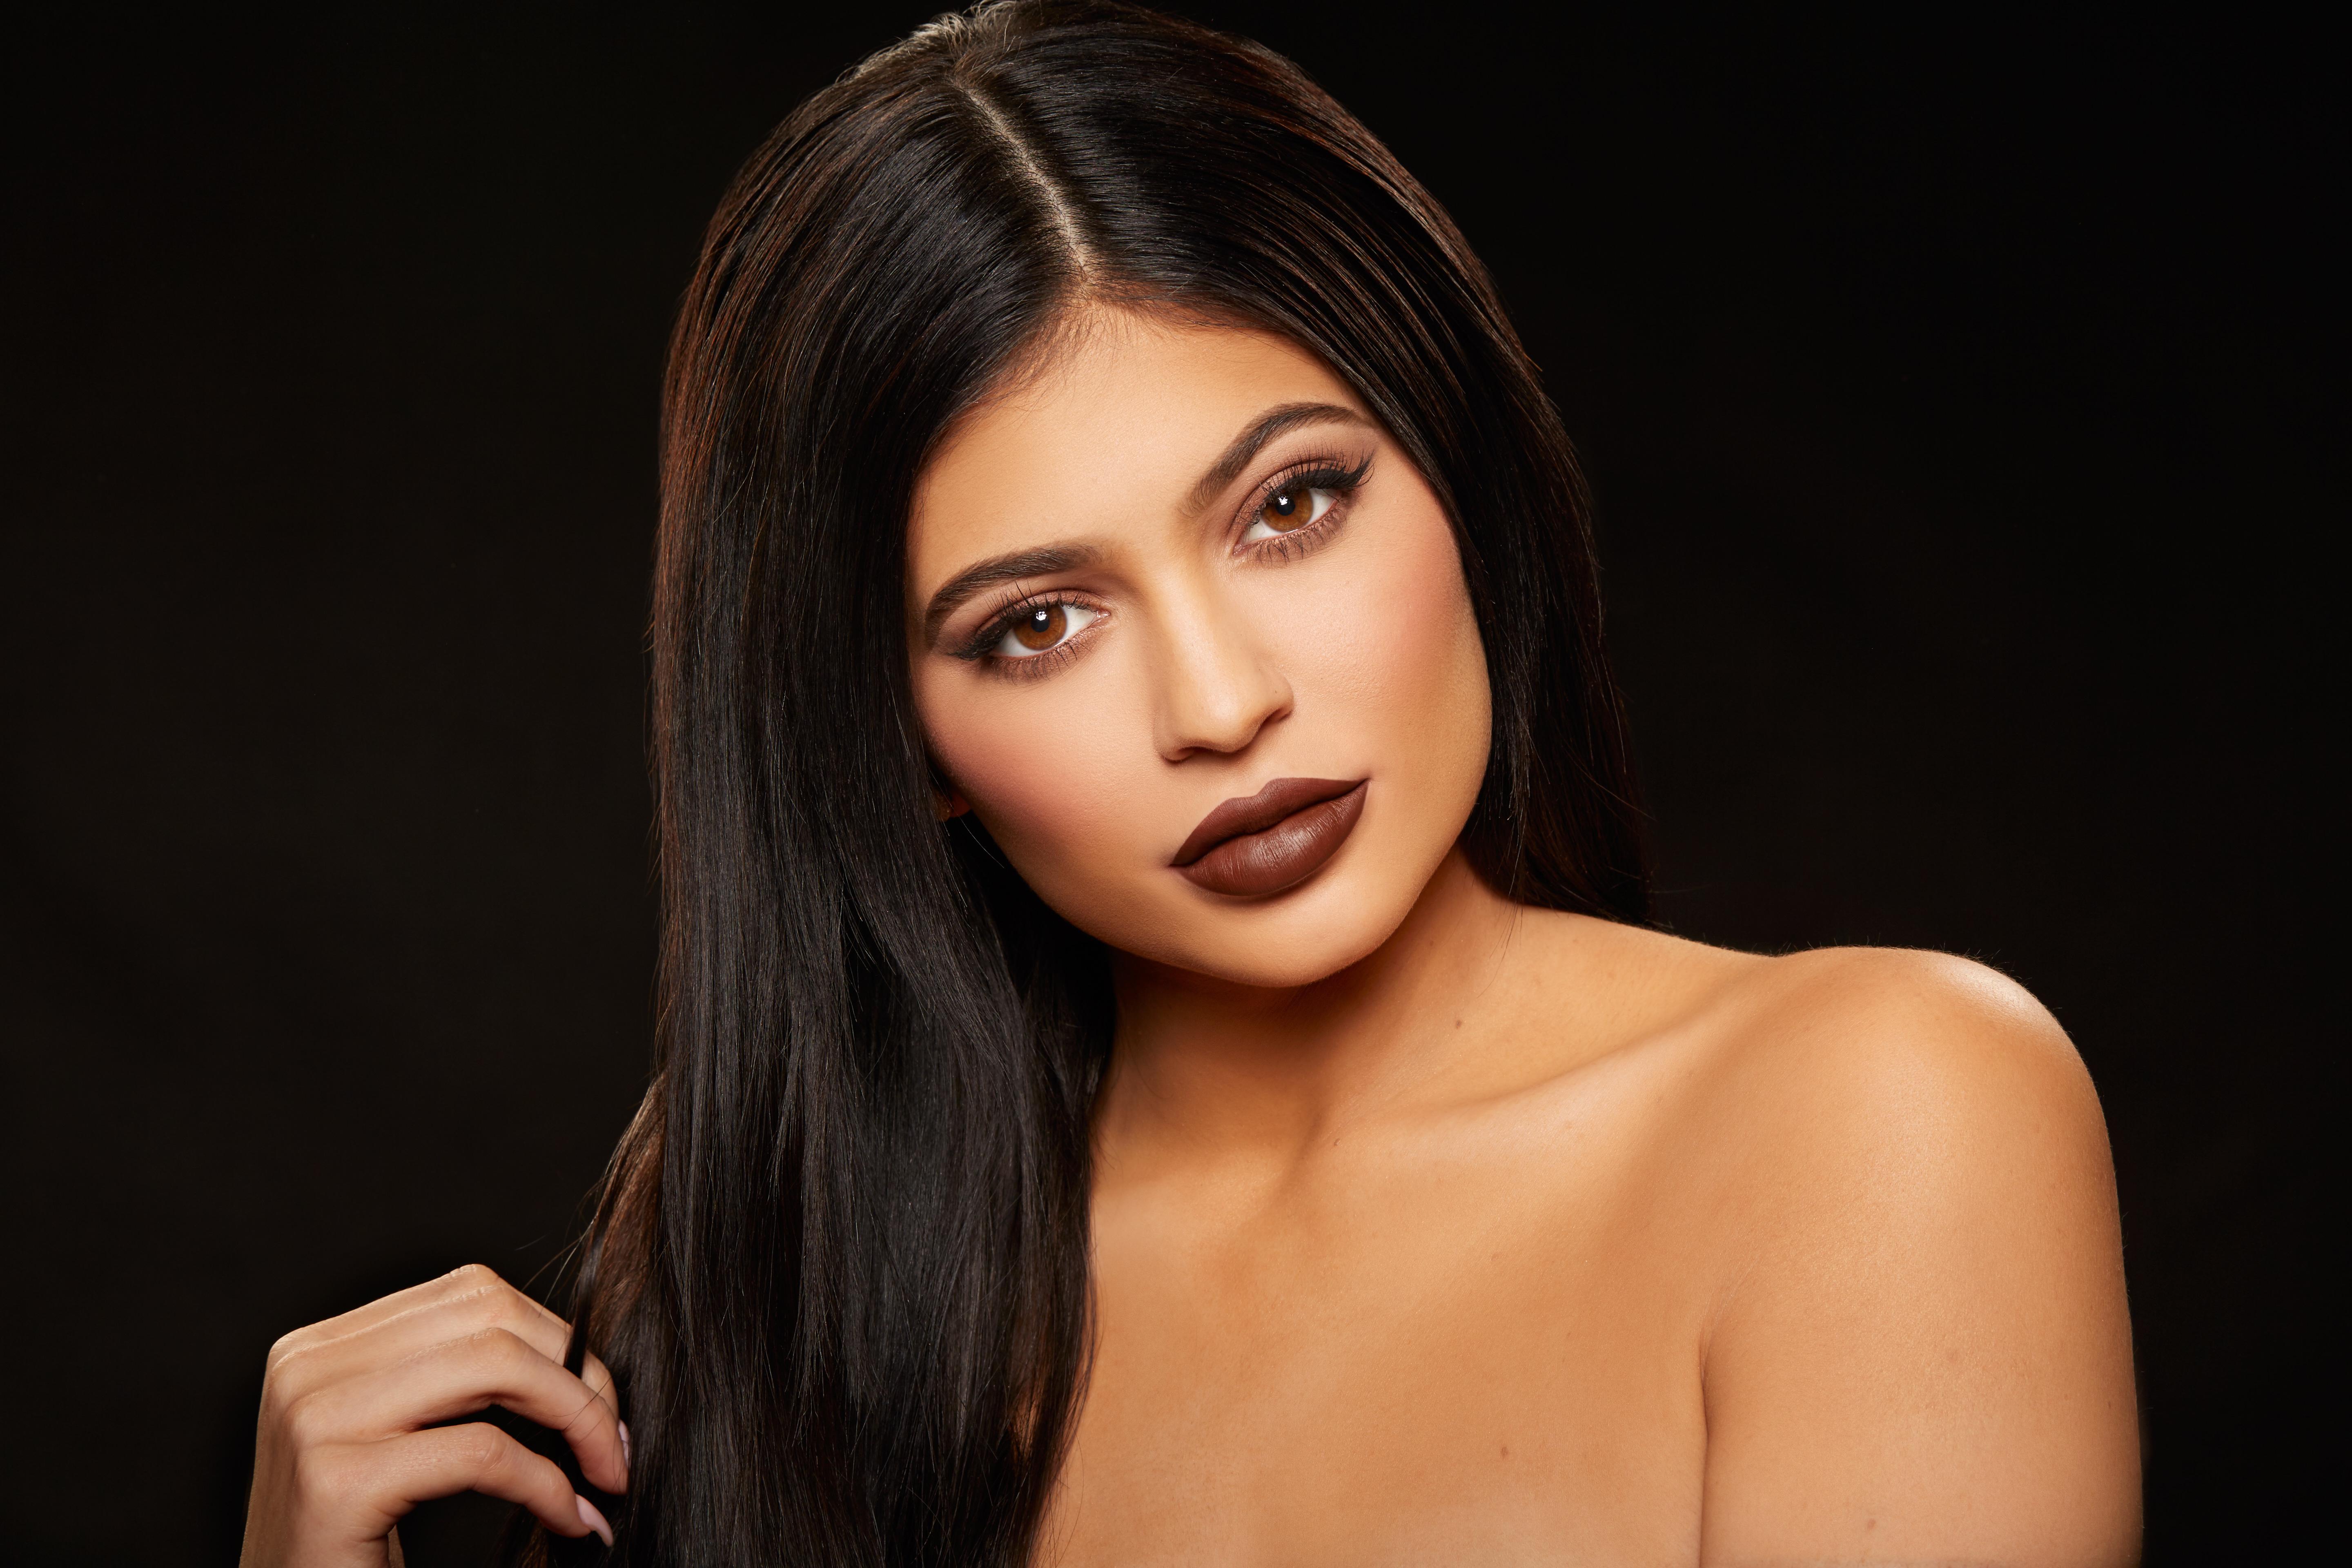 Kylie Jenner HQ Wallpapers  Kylie Jenner Wallpapers  23980  Oneindia  Wallpapers